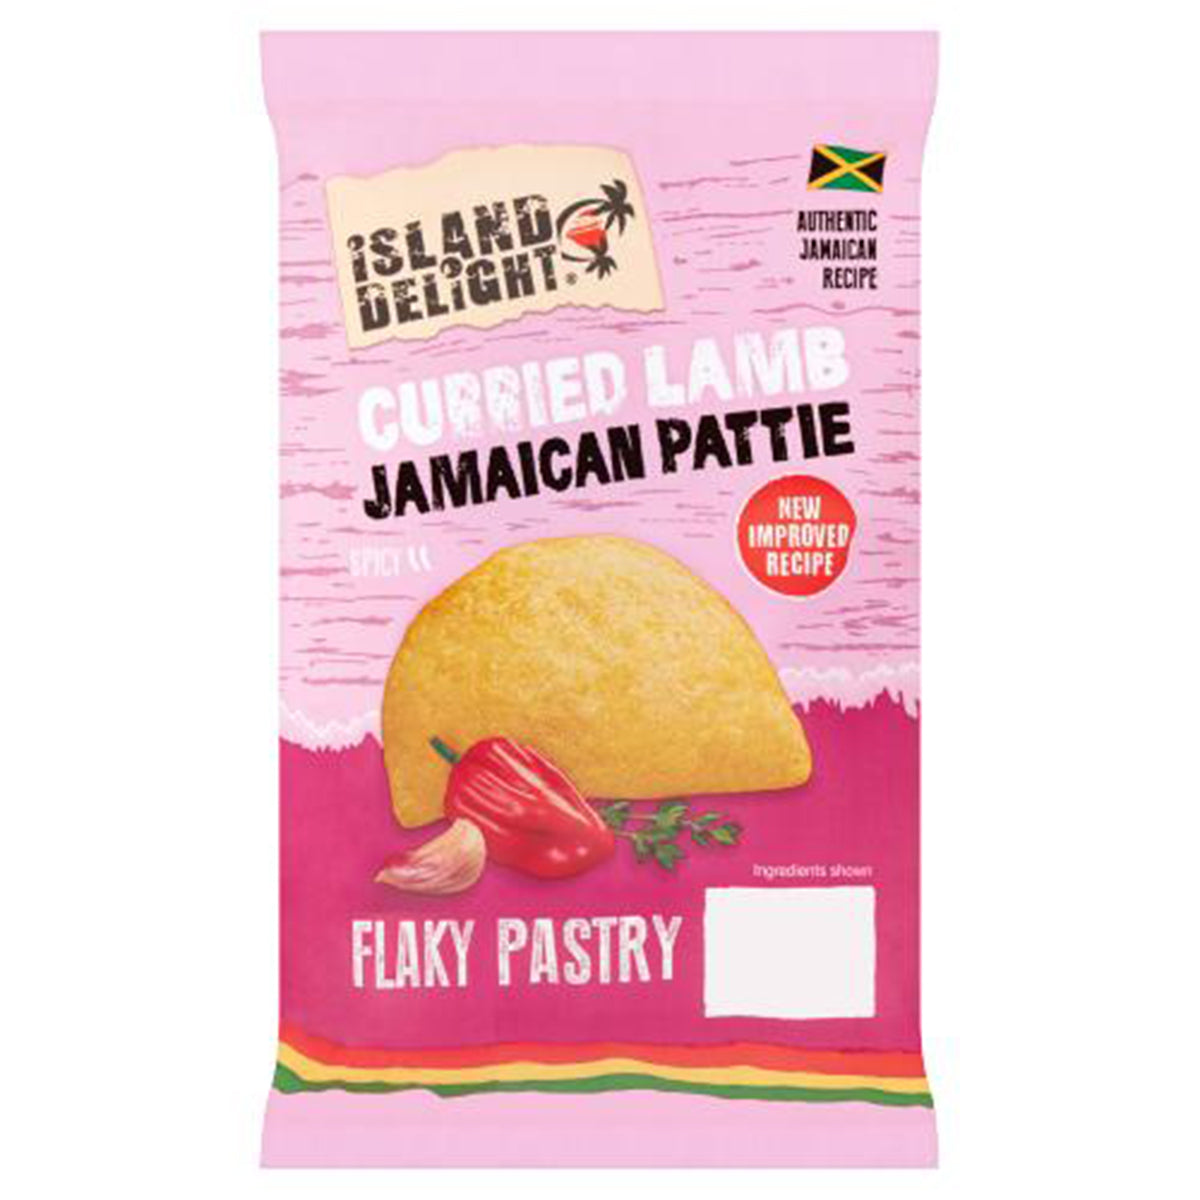 Island Delight - Curried Lamb Jamaican Pattie Flaky Pastry - 140g - Continental Food Store